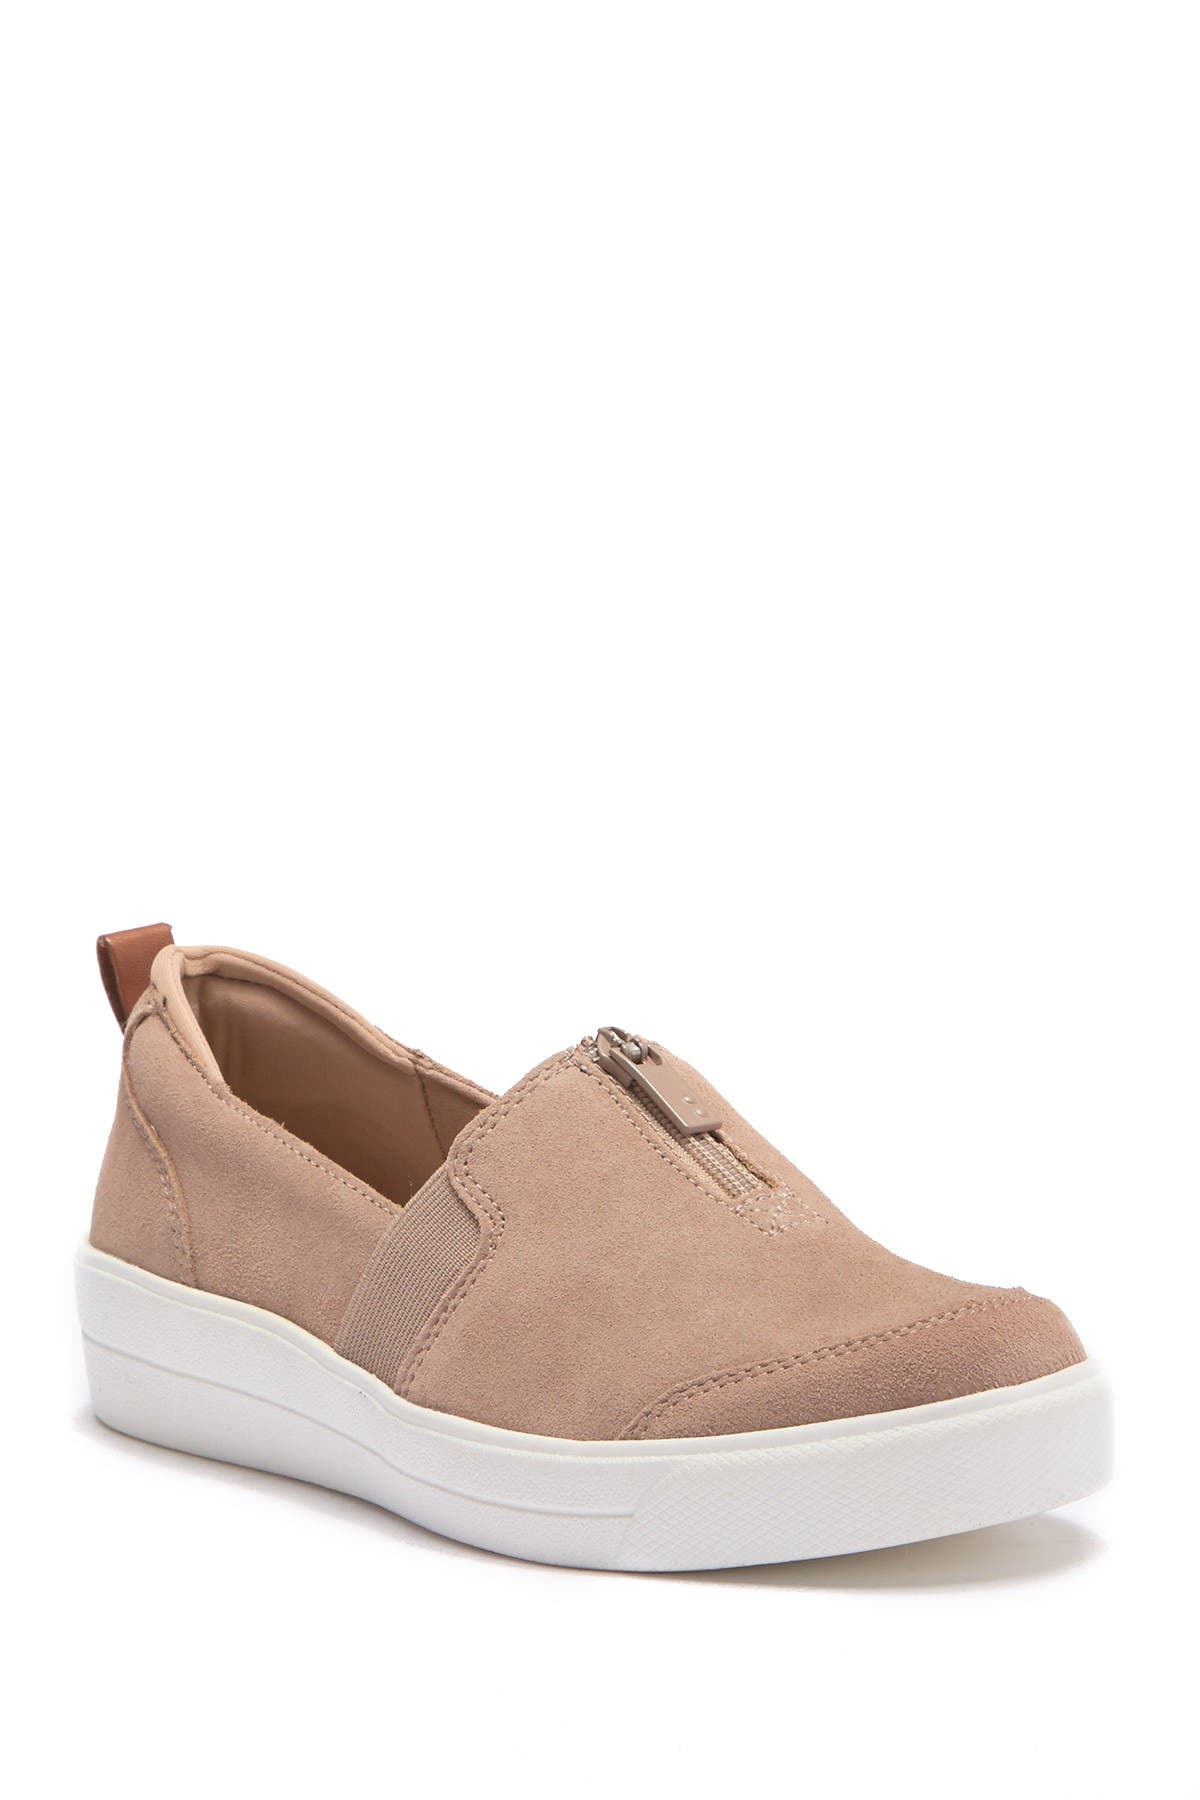 ryka suede shoes